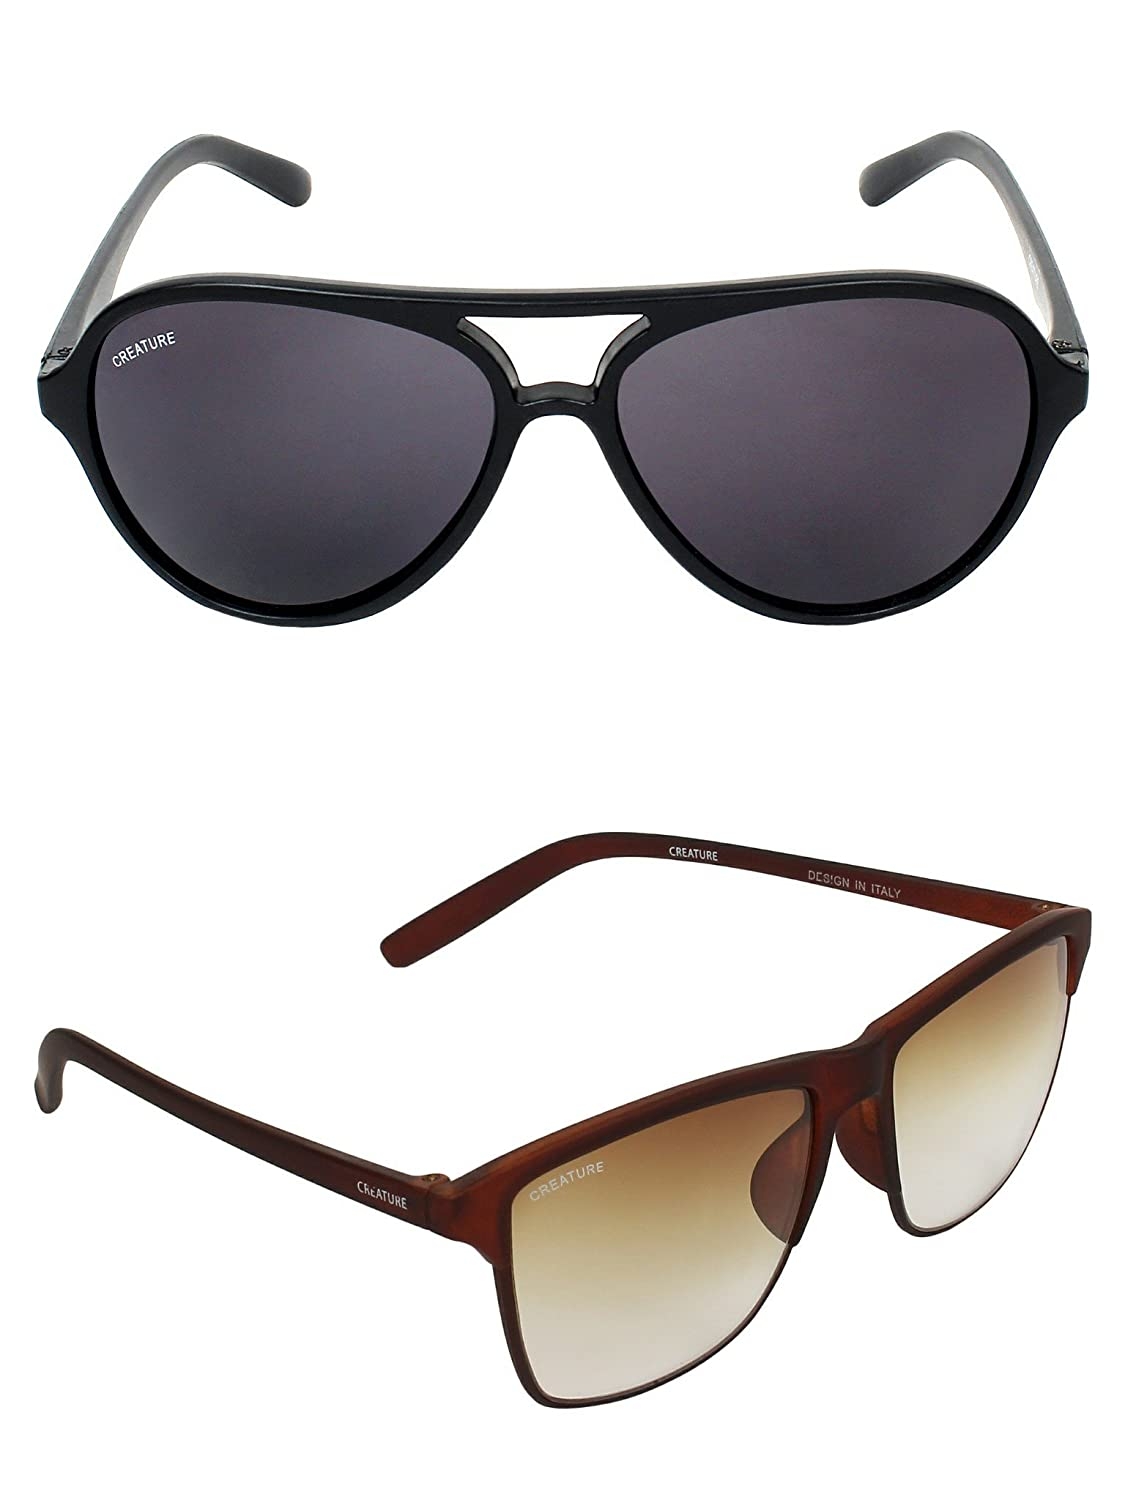 CREATURE | CREATURE Black Aviator Sunglasses Combo with UV Protection (Lens-Black & Brown|Frame-Black)